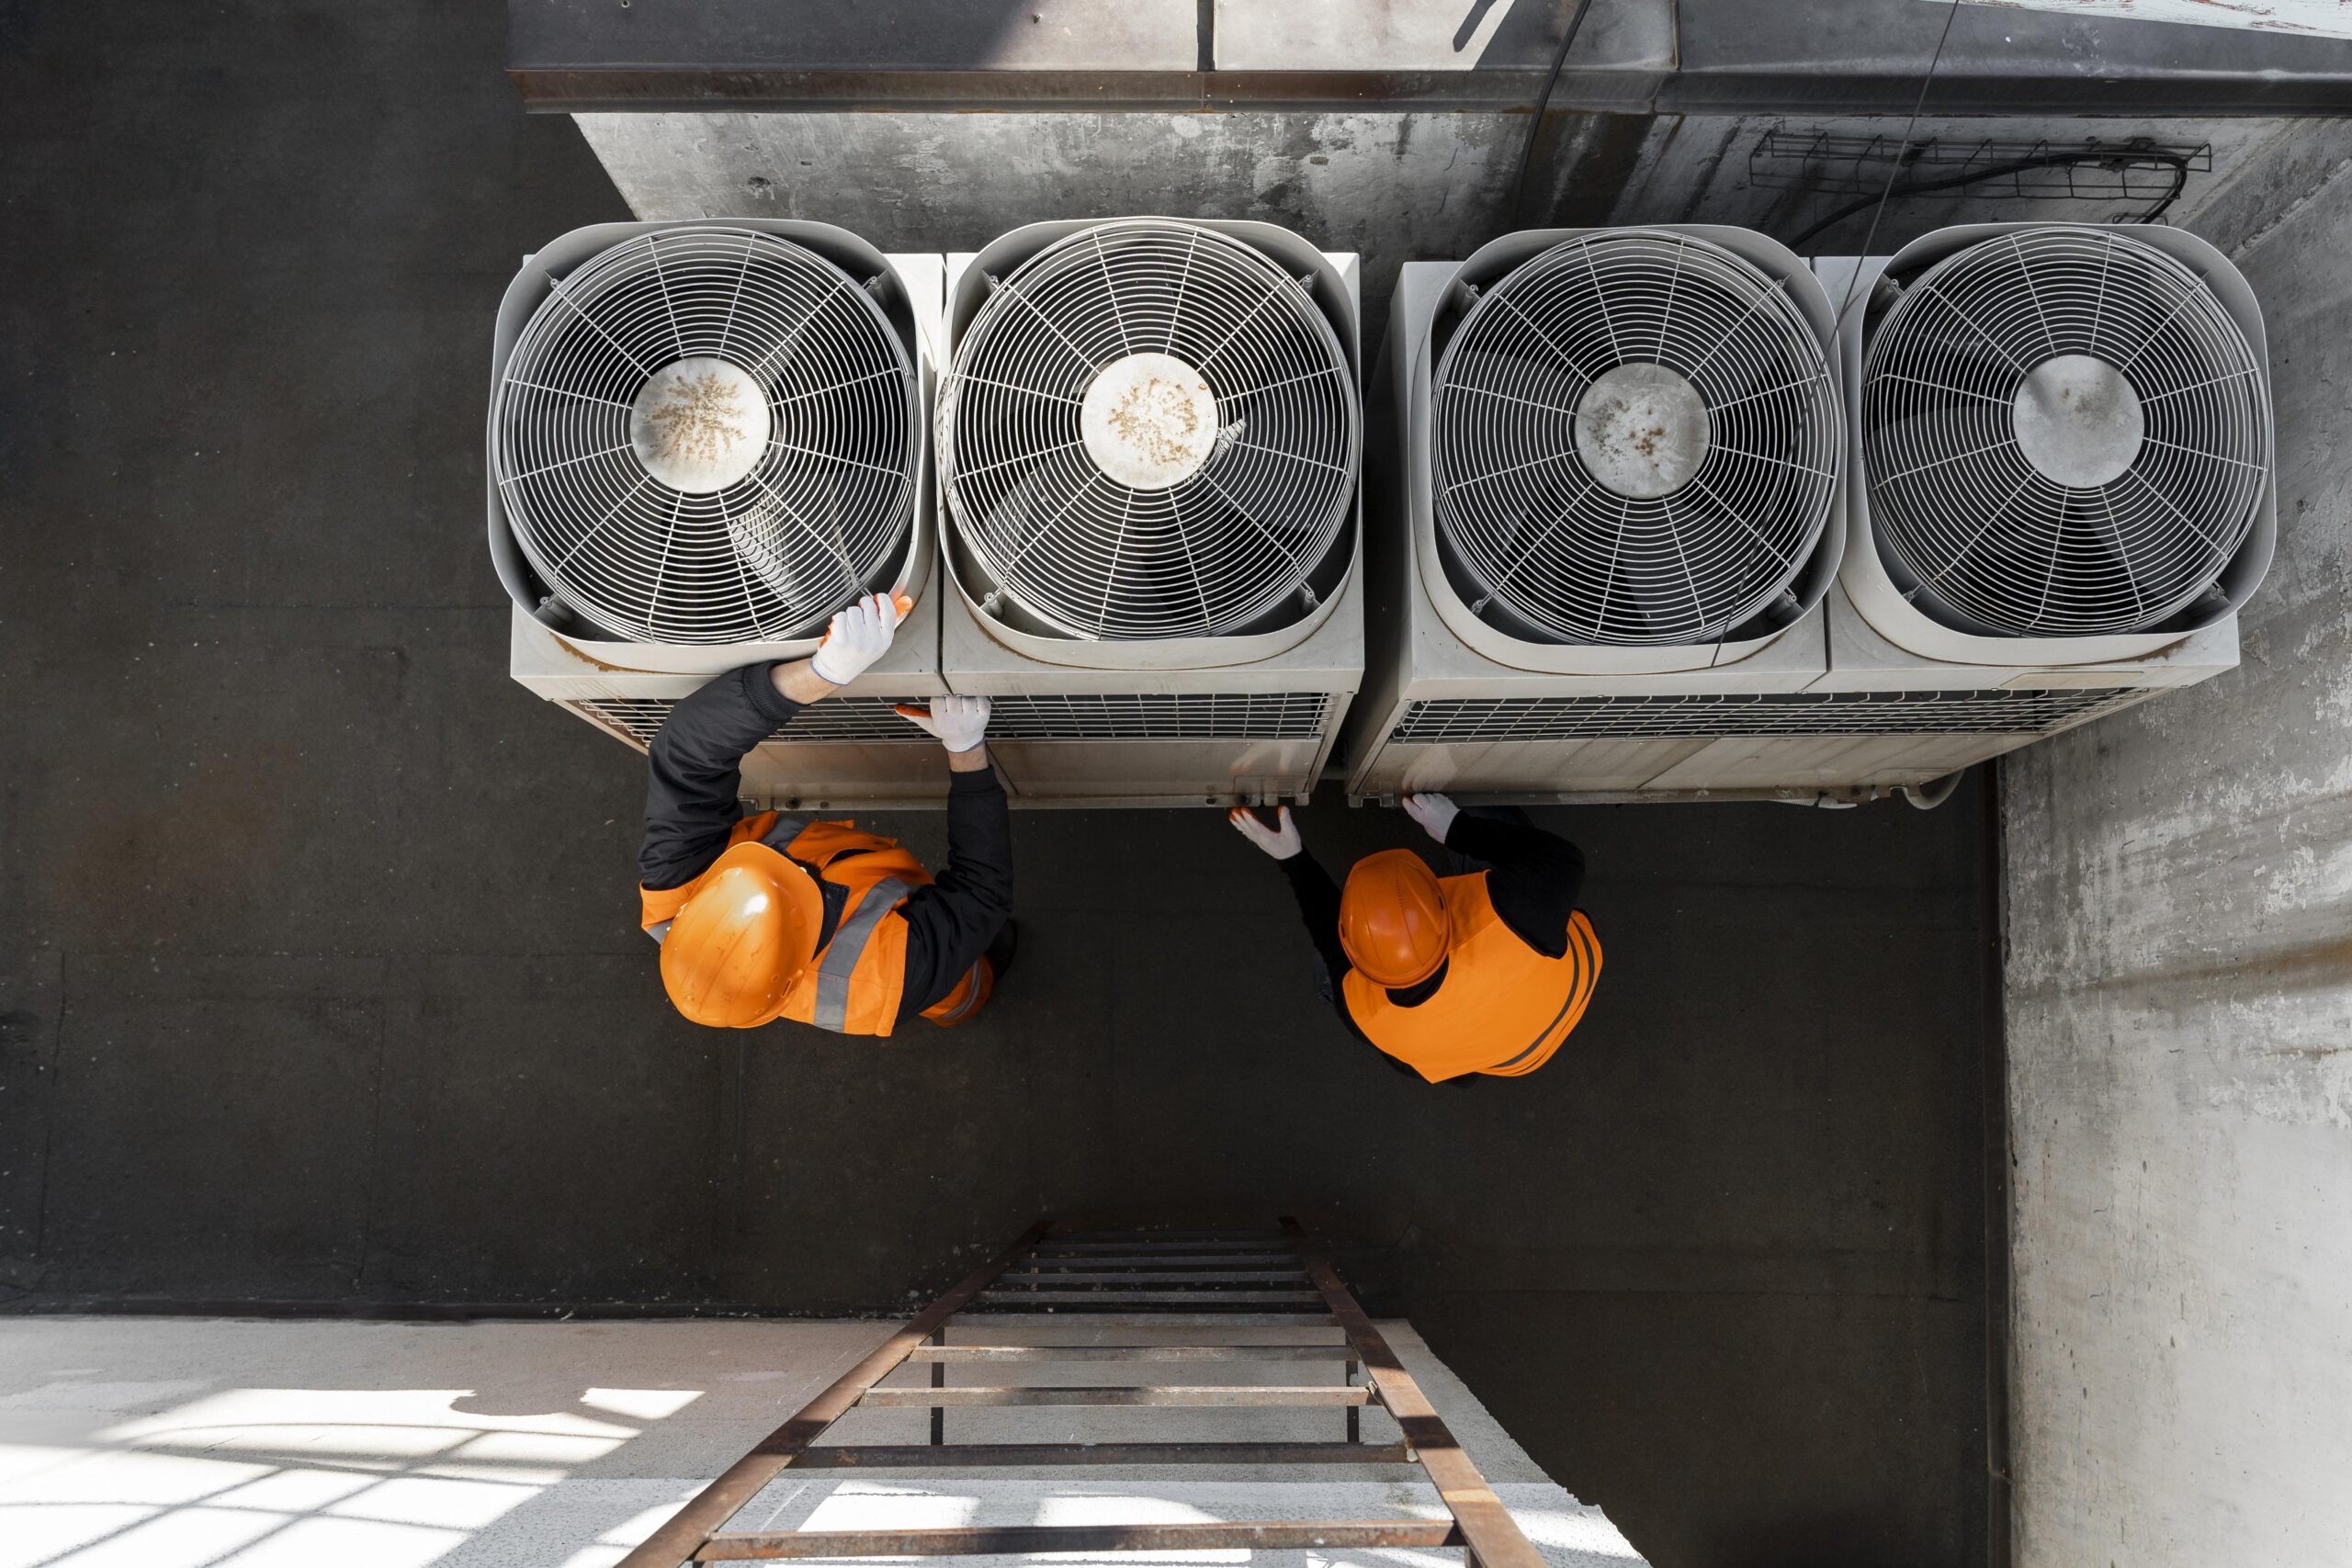 Two men seen working on HVAC equipment from above